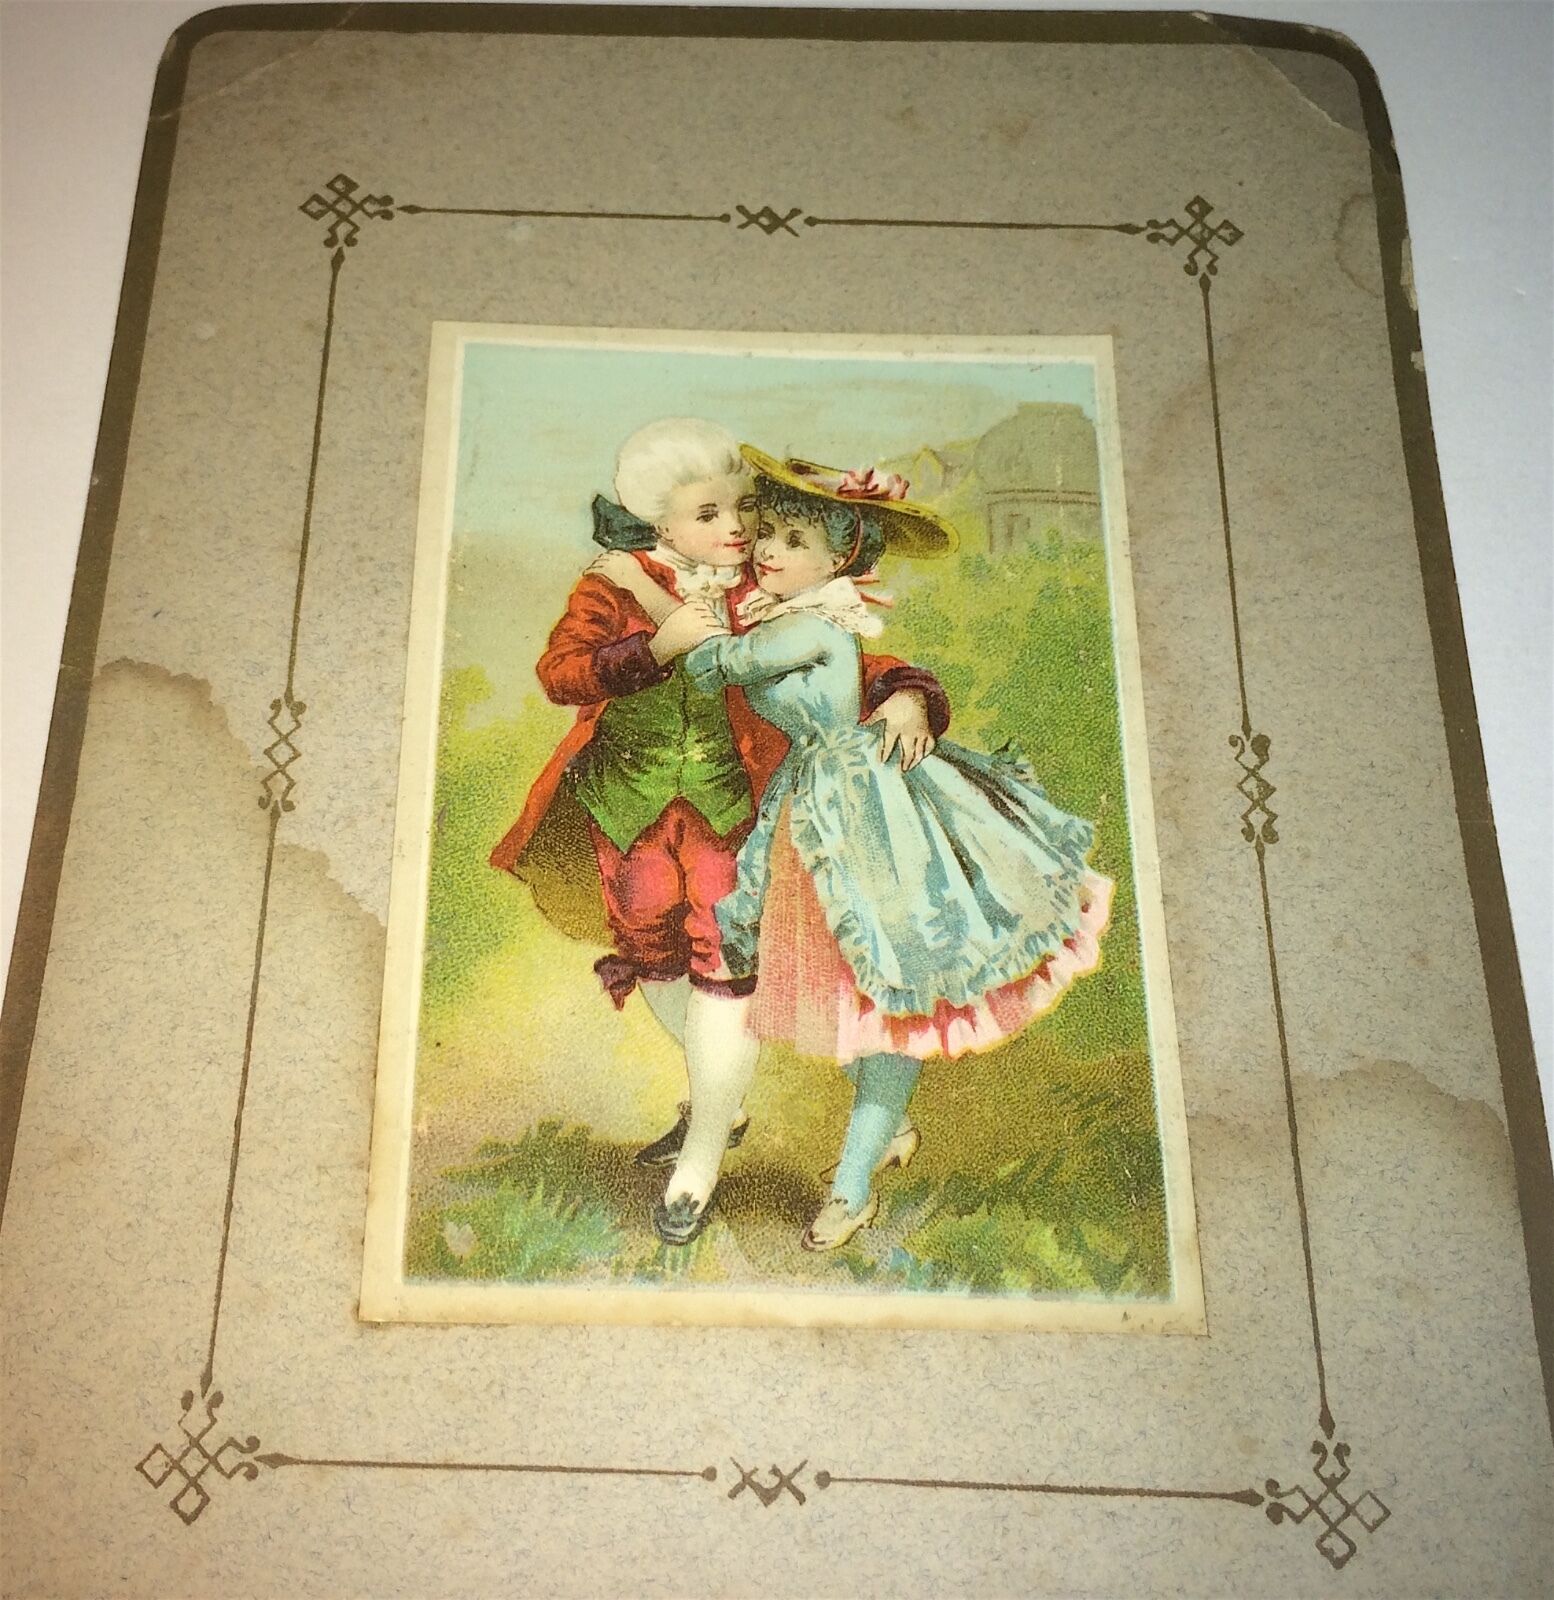 Rare Large Antique Victorian American Clothing Advertising Hyde Park Trade Card